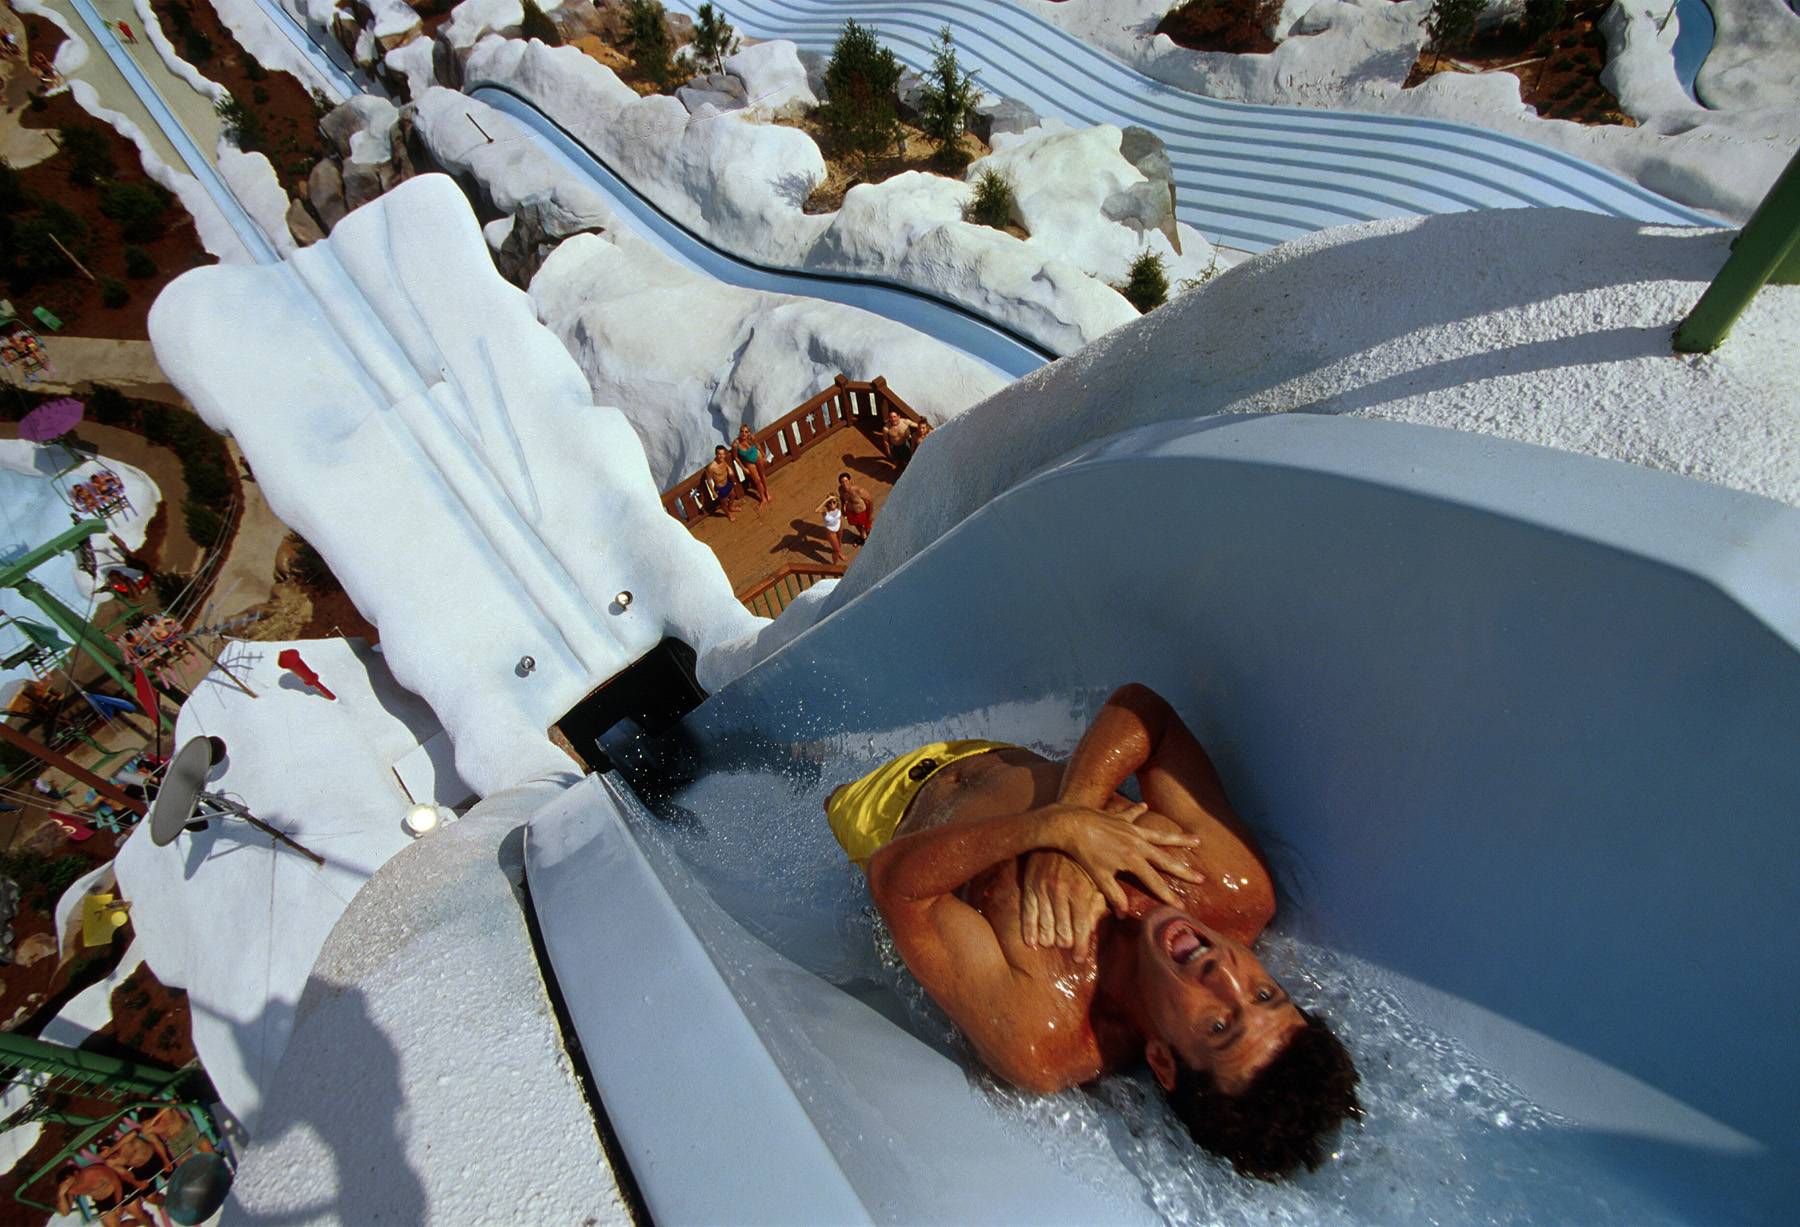 Blizzard Beach closed due to severe weather